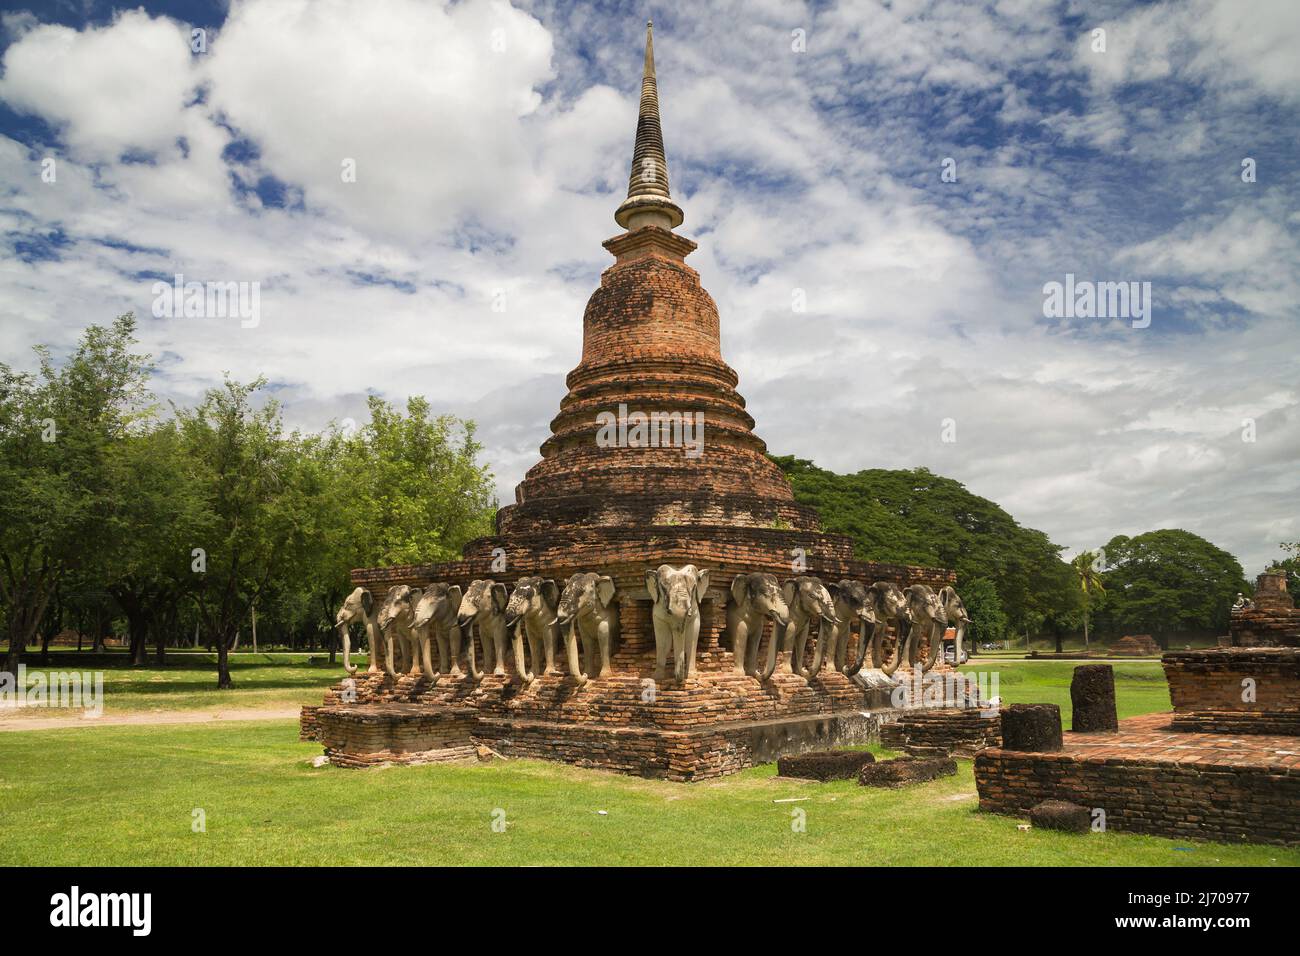 Chedi Surrounded by Elephants in Sukhothai, Thailand. Stock Photo